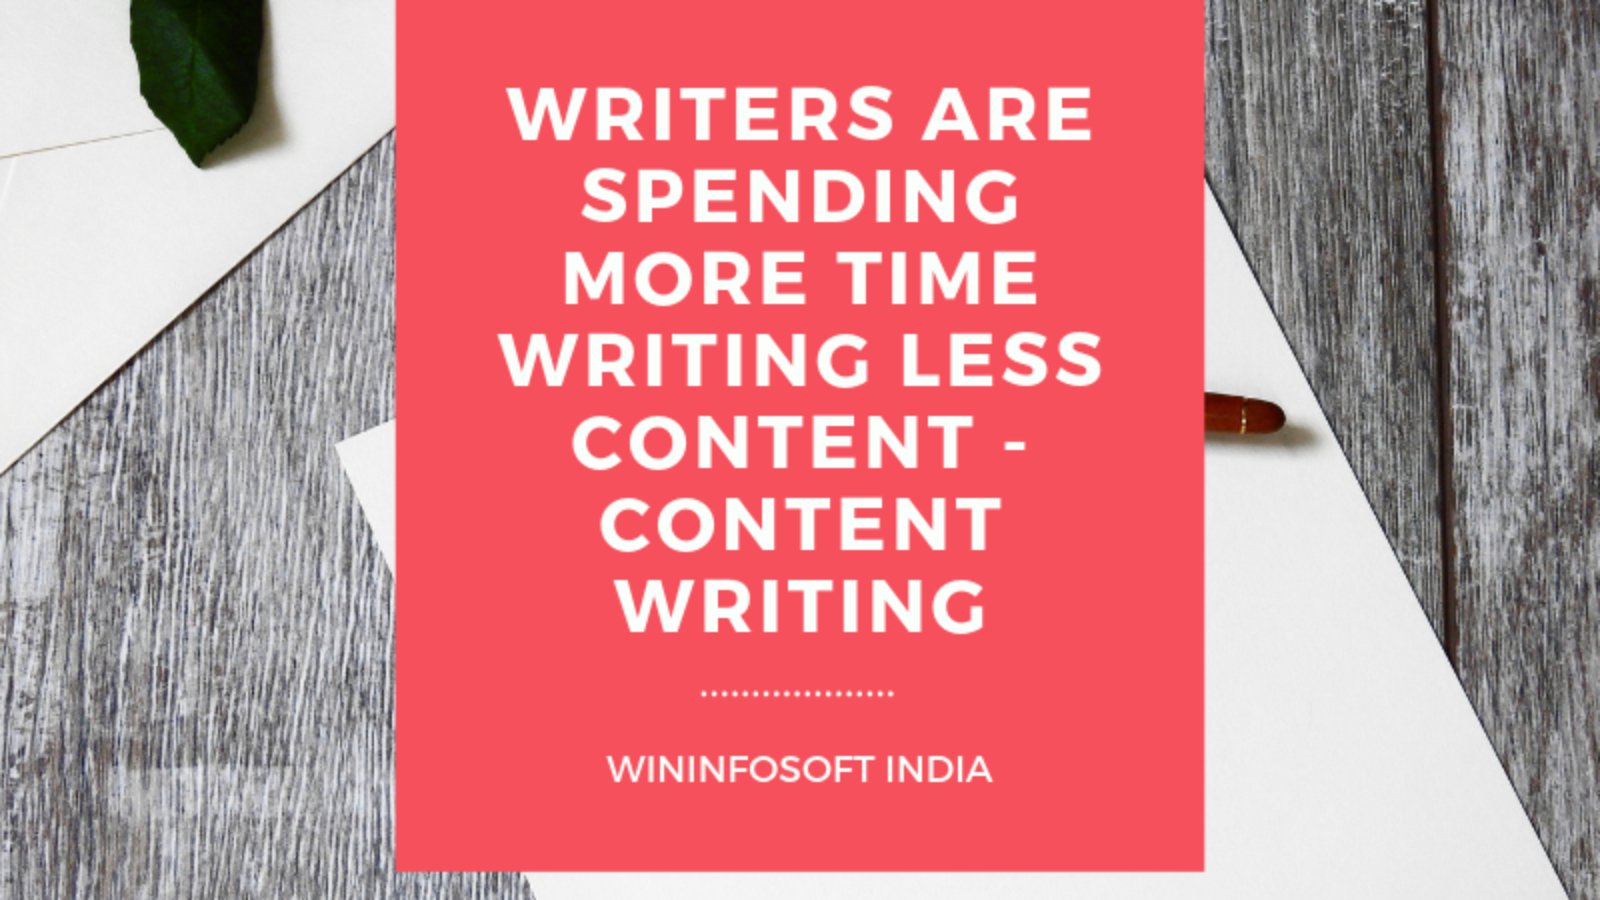 Writers Are Spending More Time Writing Less Content - Content Writing